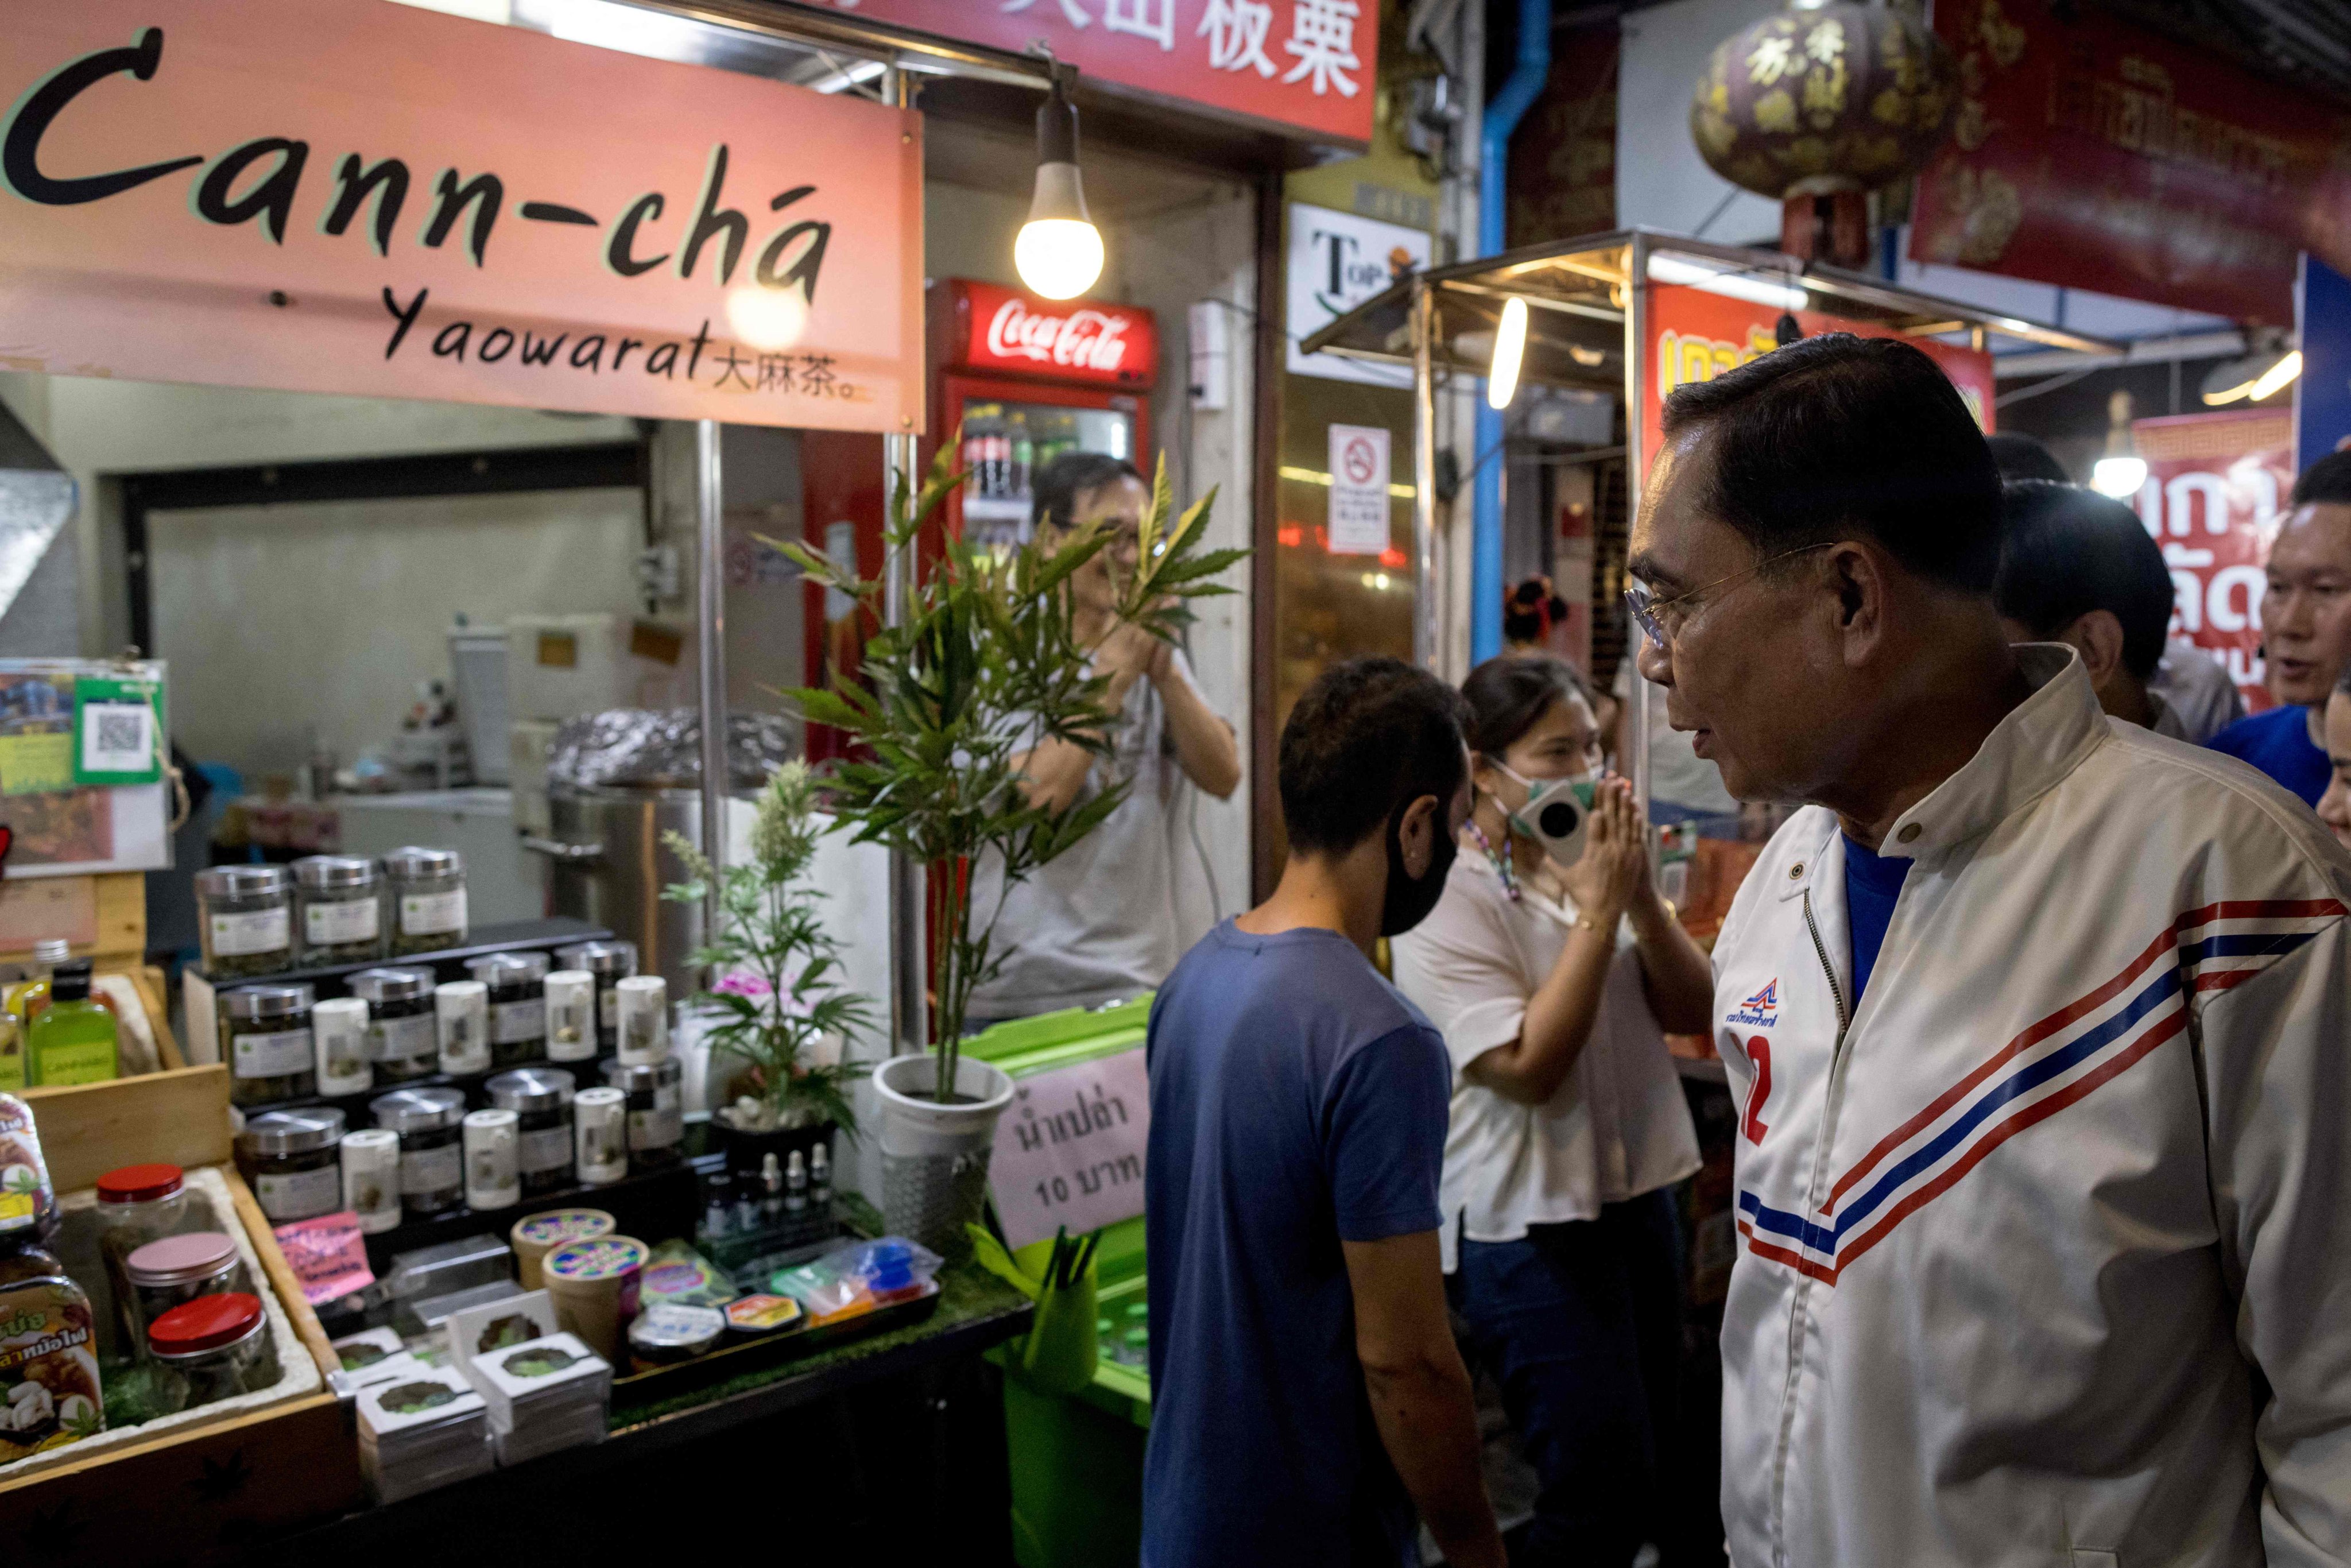 Thai Prime Minister and United Thai Nation Party candidate Prayuth Chan-ocha looks at a stall selling cannabis as he campaigns in the Chinatown area of Bangkok on April 20, 2023. Photo: AFP